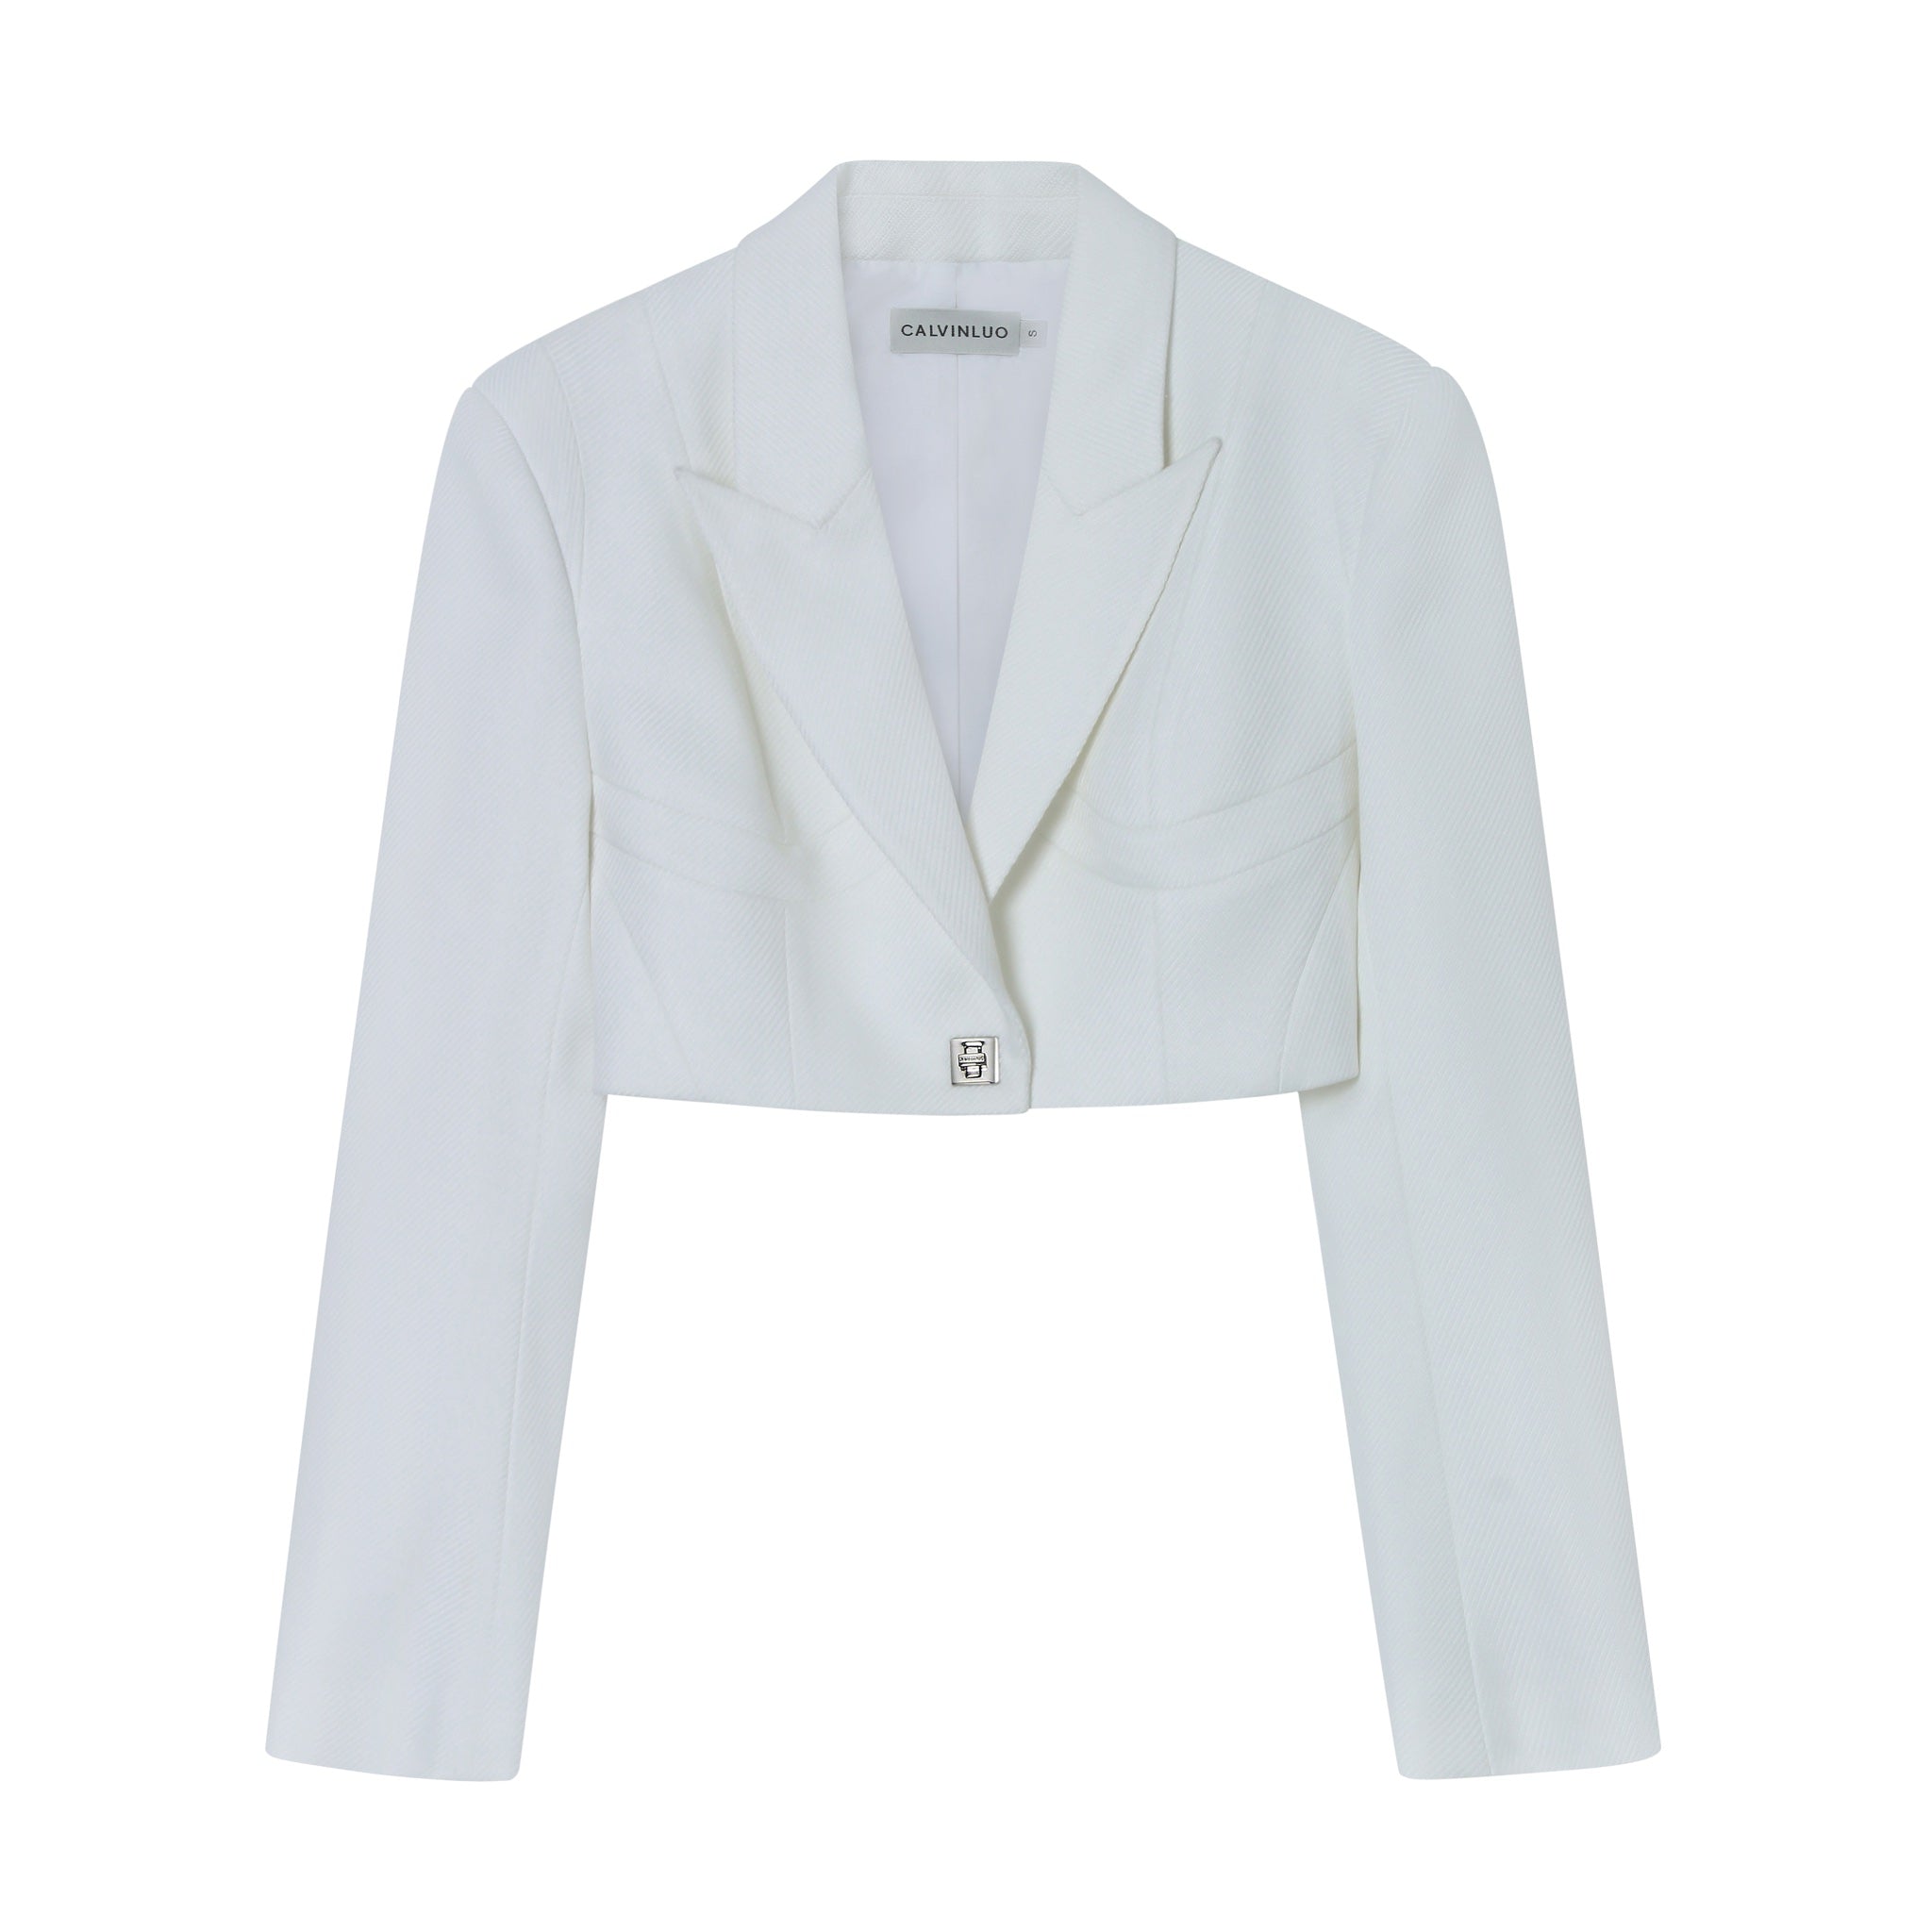 CALVIN LUO White Structured Line Short Suit | MADA IN CHINA